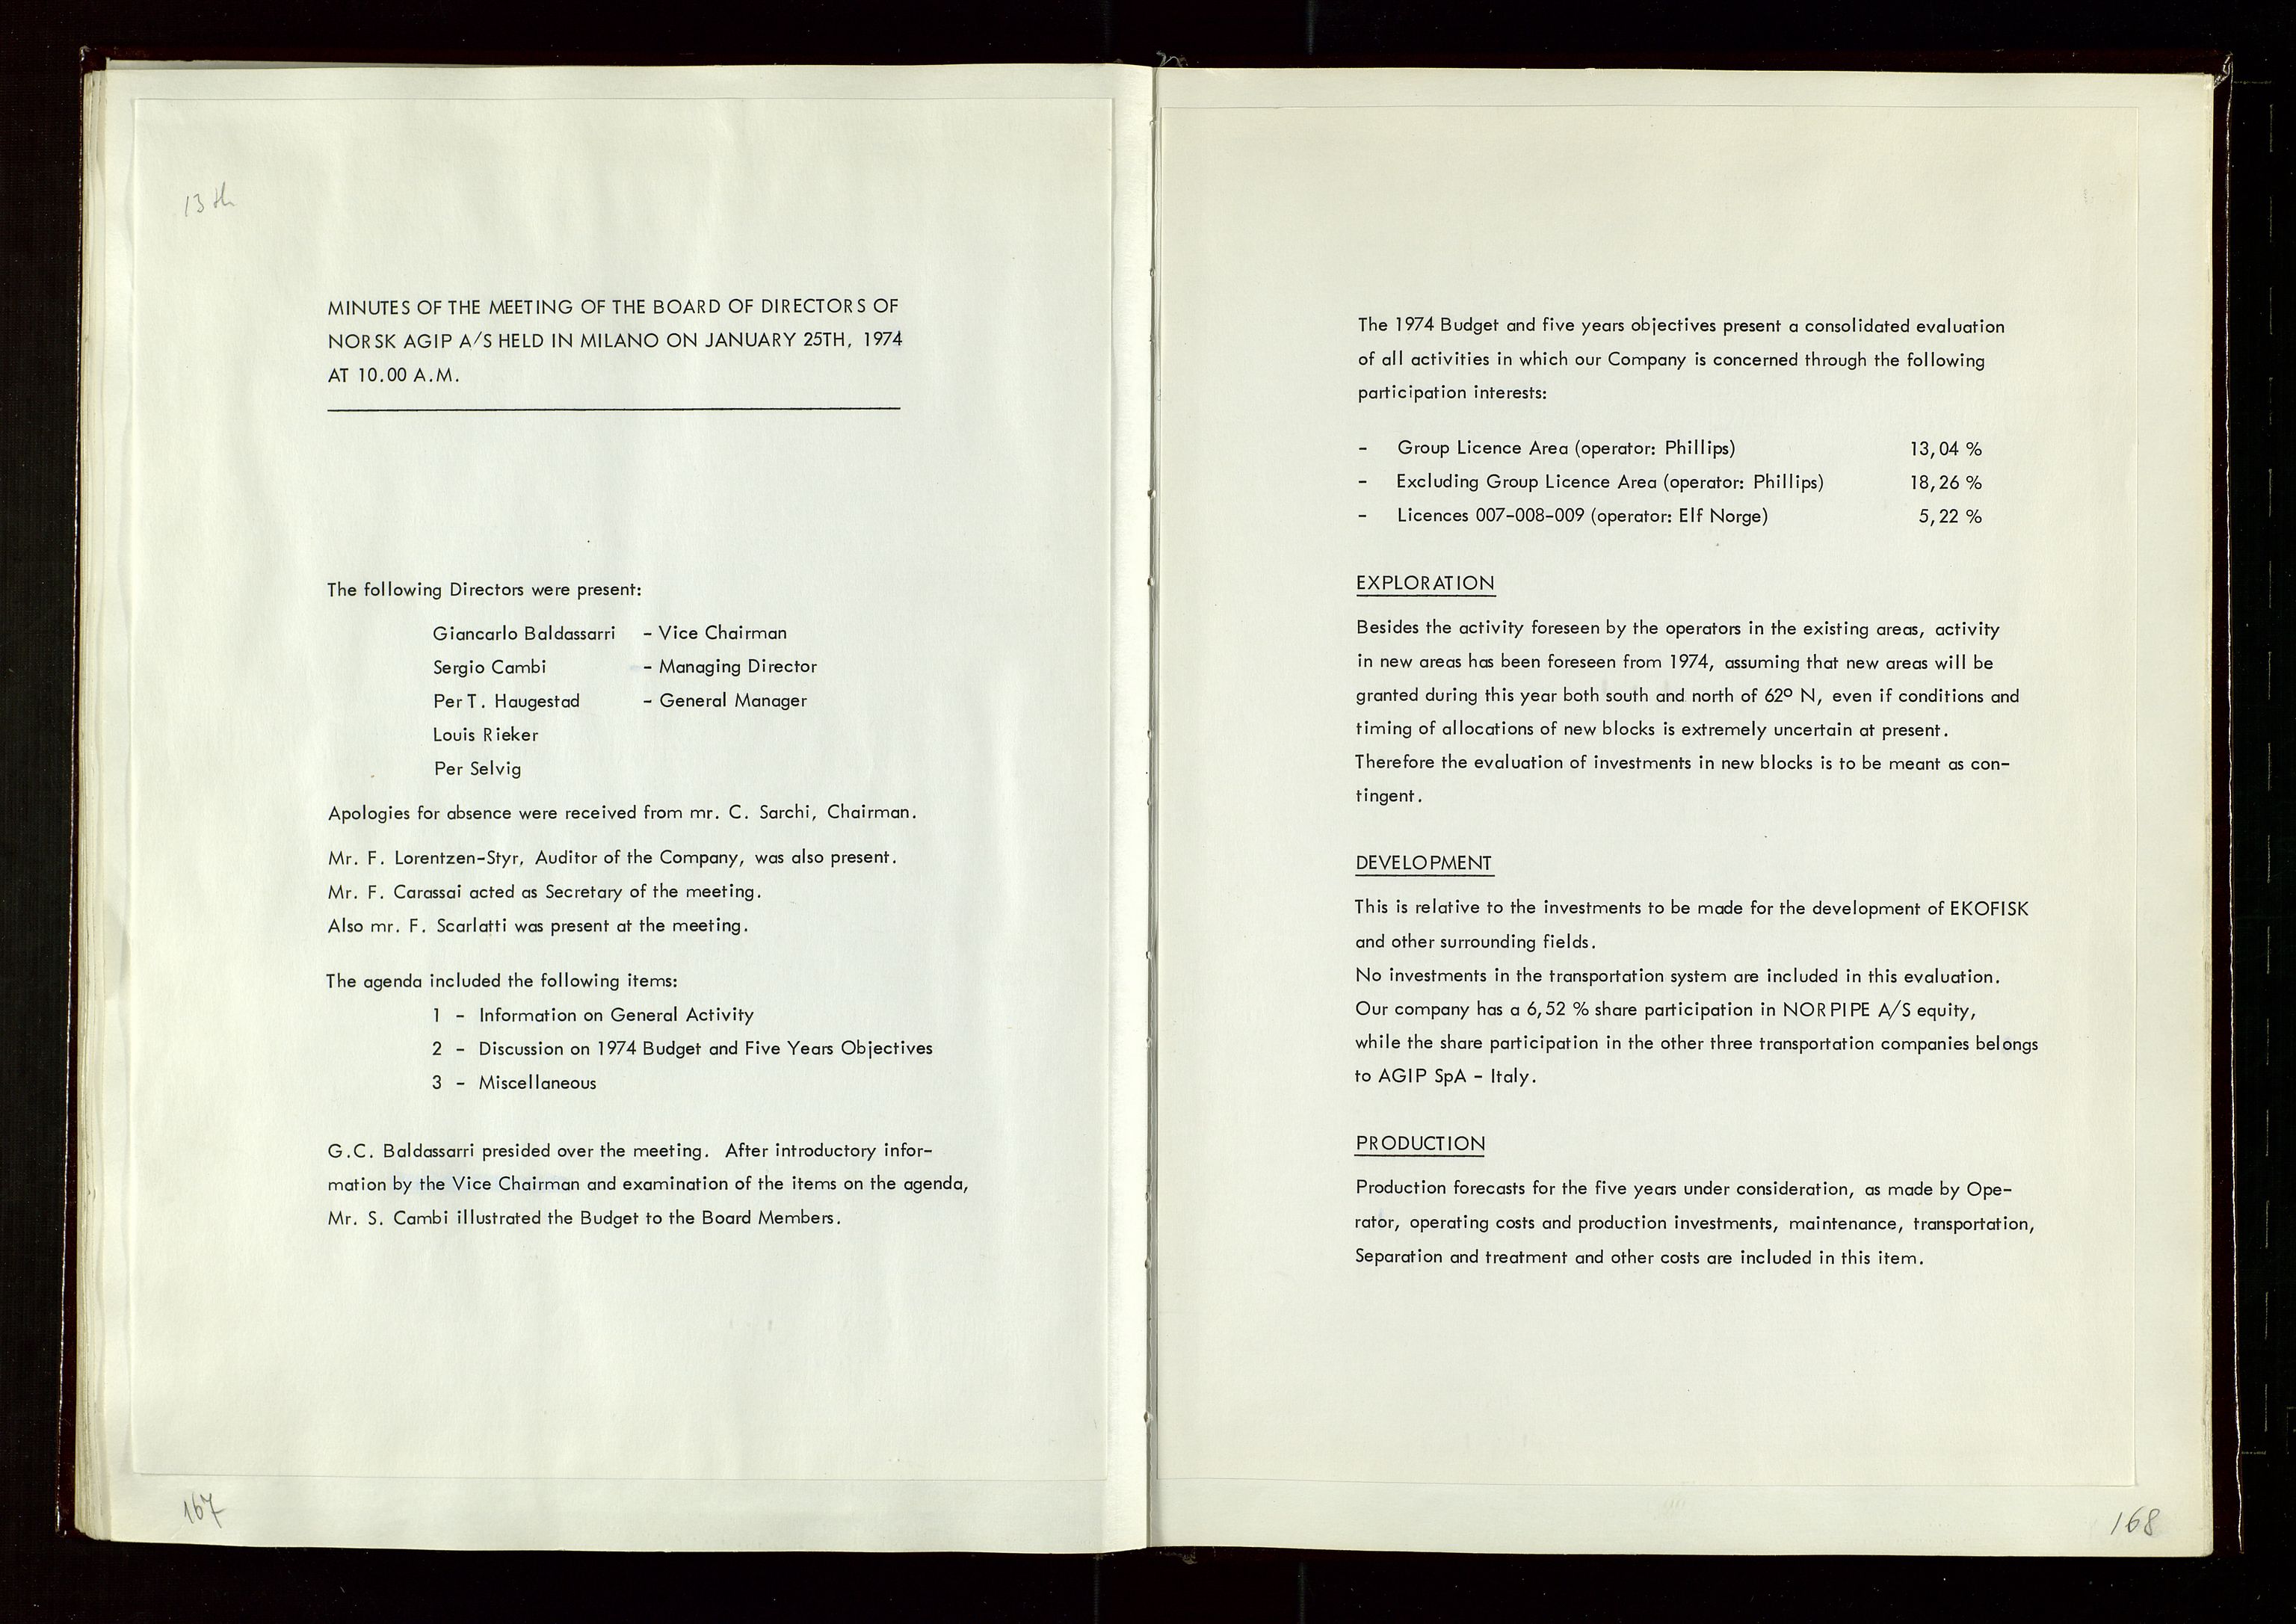 Pa 1583 - Norsk Agip AS, SAST/A-102138/A/Aa/L0002: General assembly and Board of Directors meeting minutes, 1972-1979, s. 167-168